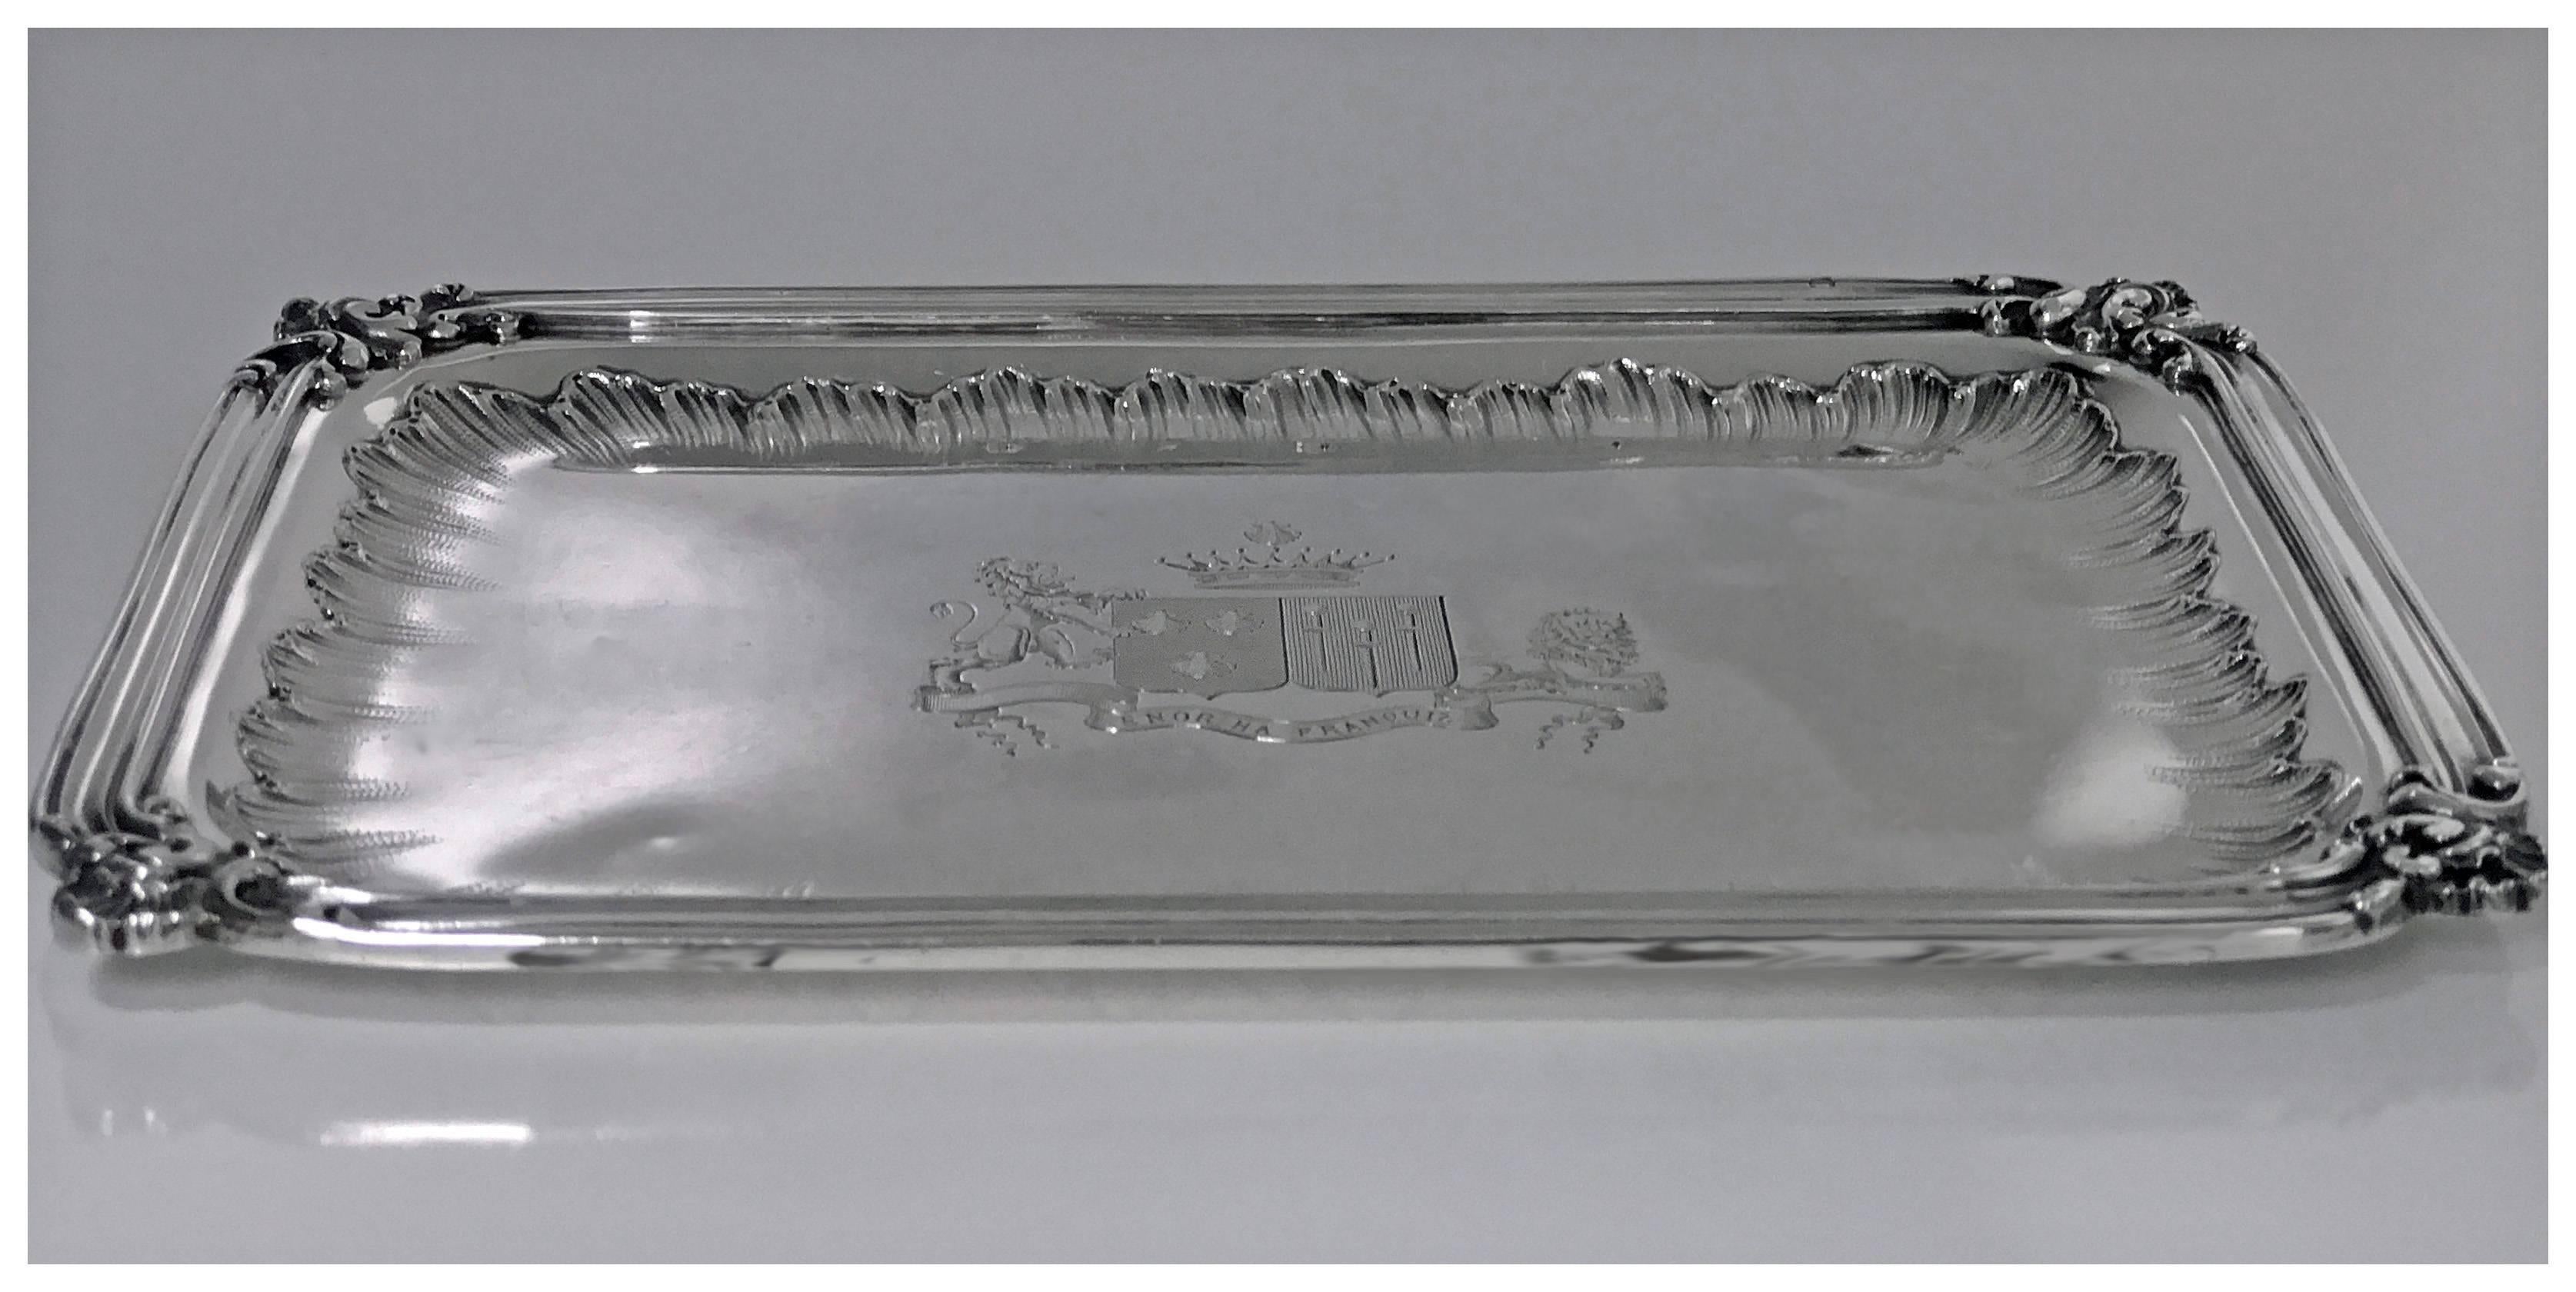 French 1st std (.950) silver tray, circa 1900, Frays Fils. The tray of small rectangular shape, raised ribbed border accented shell cornices, the interior plain with stippled surround crested in the centre with elaborate coat of arms surmounted with